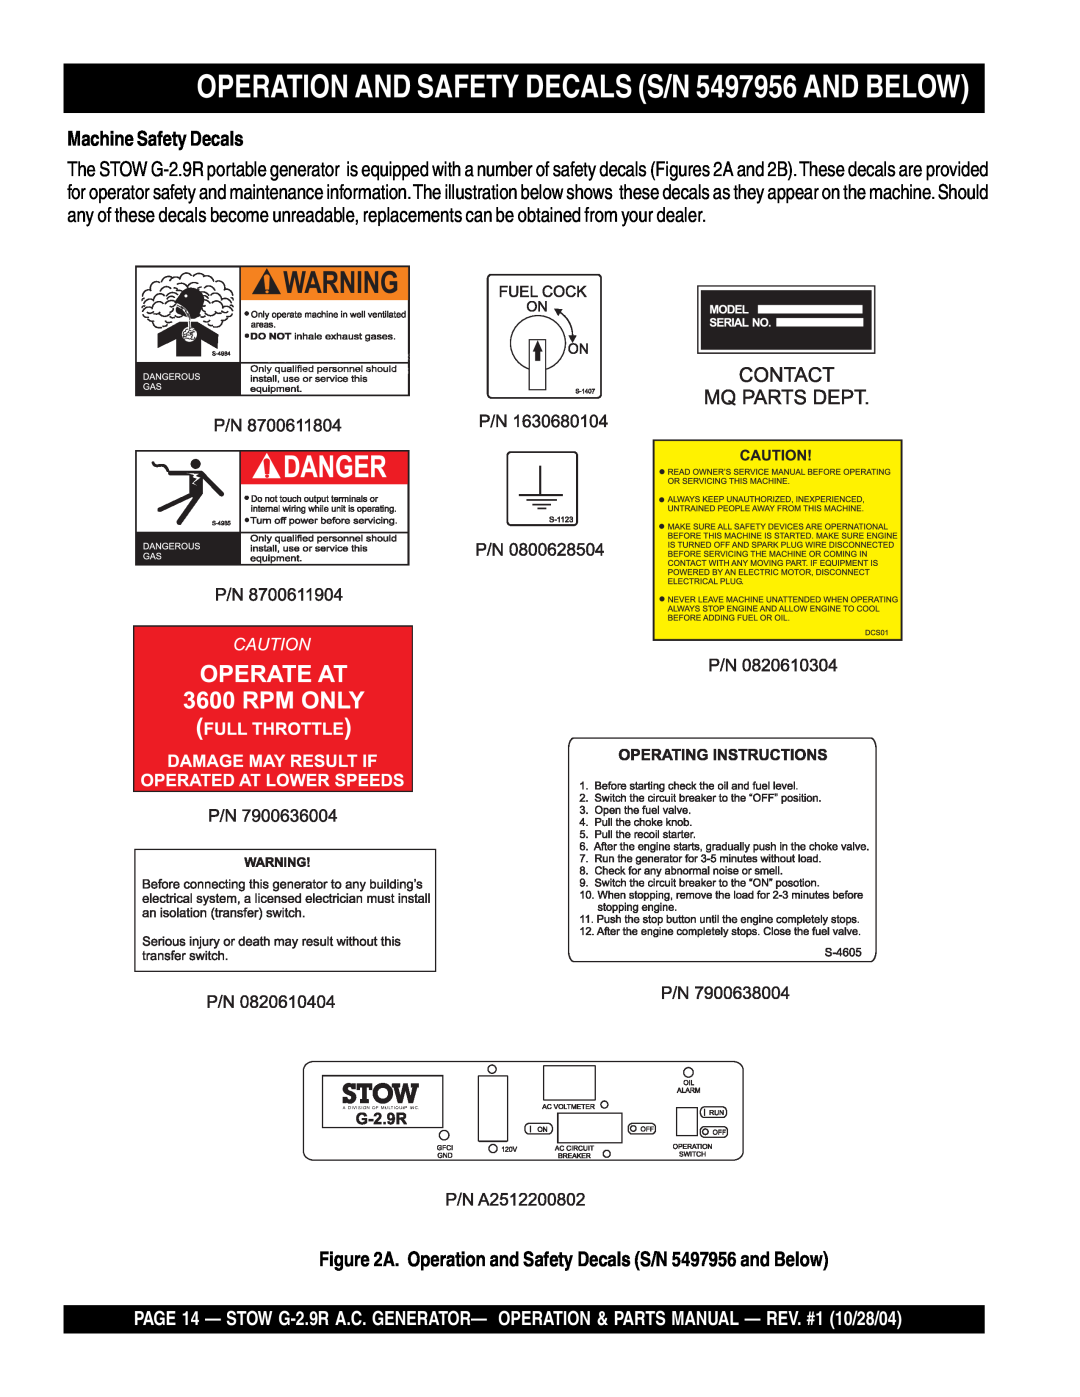 Stow G-2.9R manual OPERATION AND SAFETY DECALS S/N 5497956 AND BELOW, Machine Safety Decals 